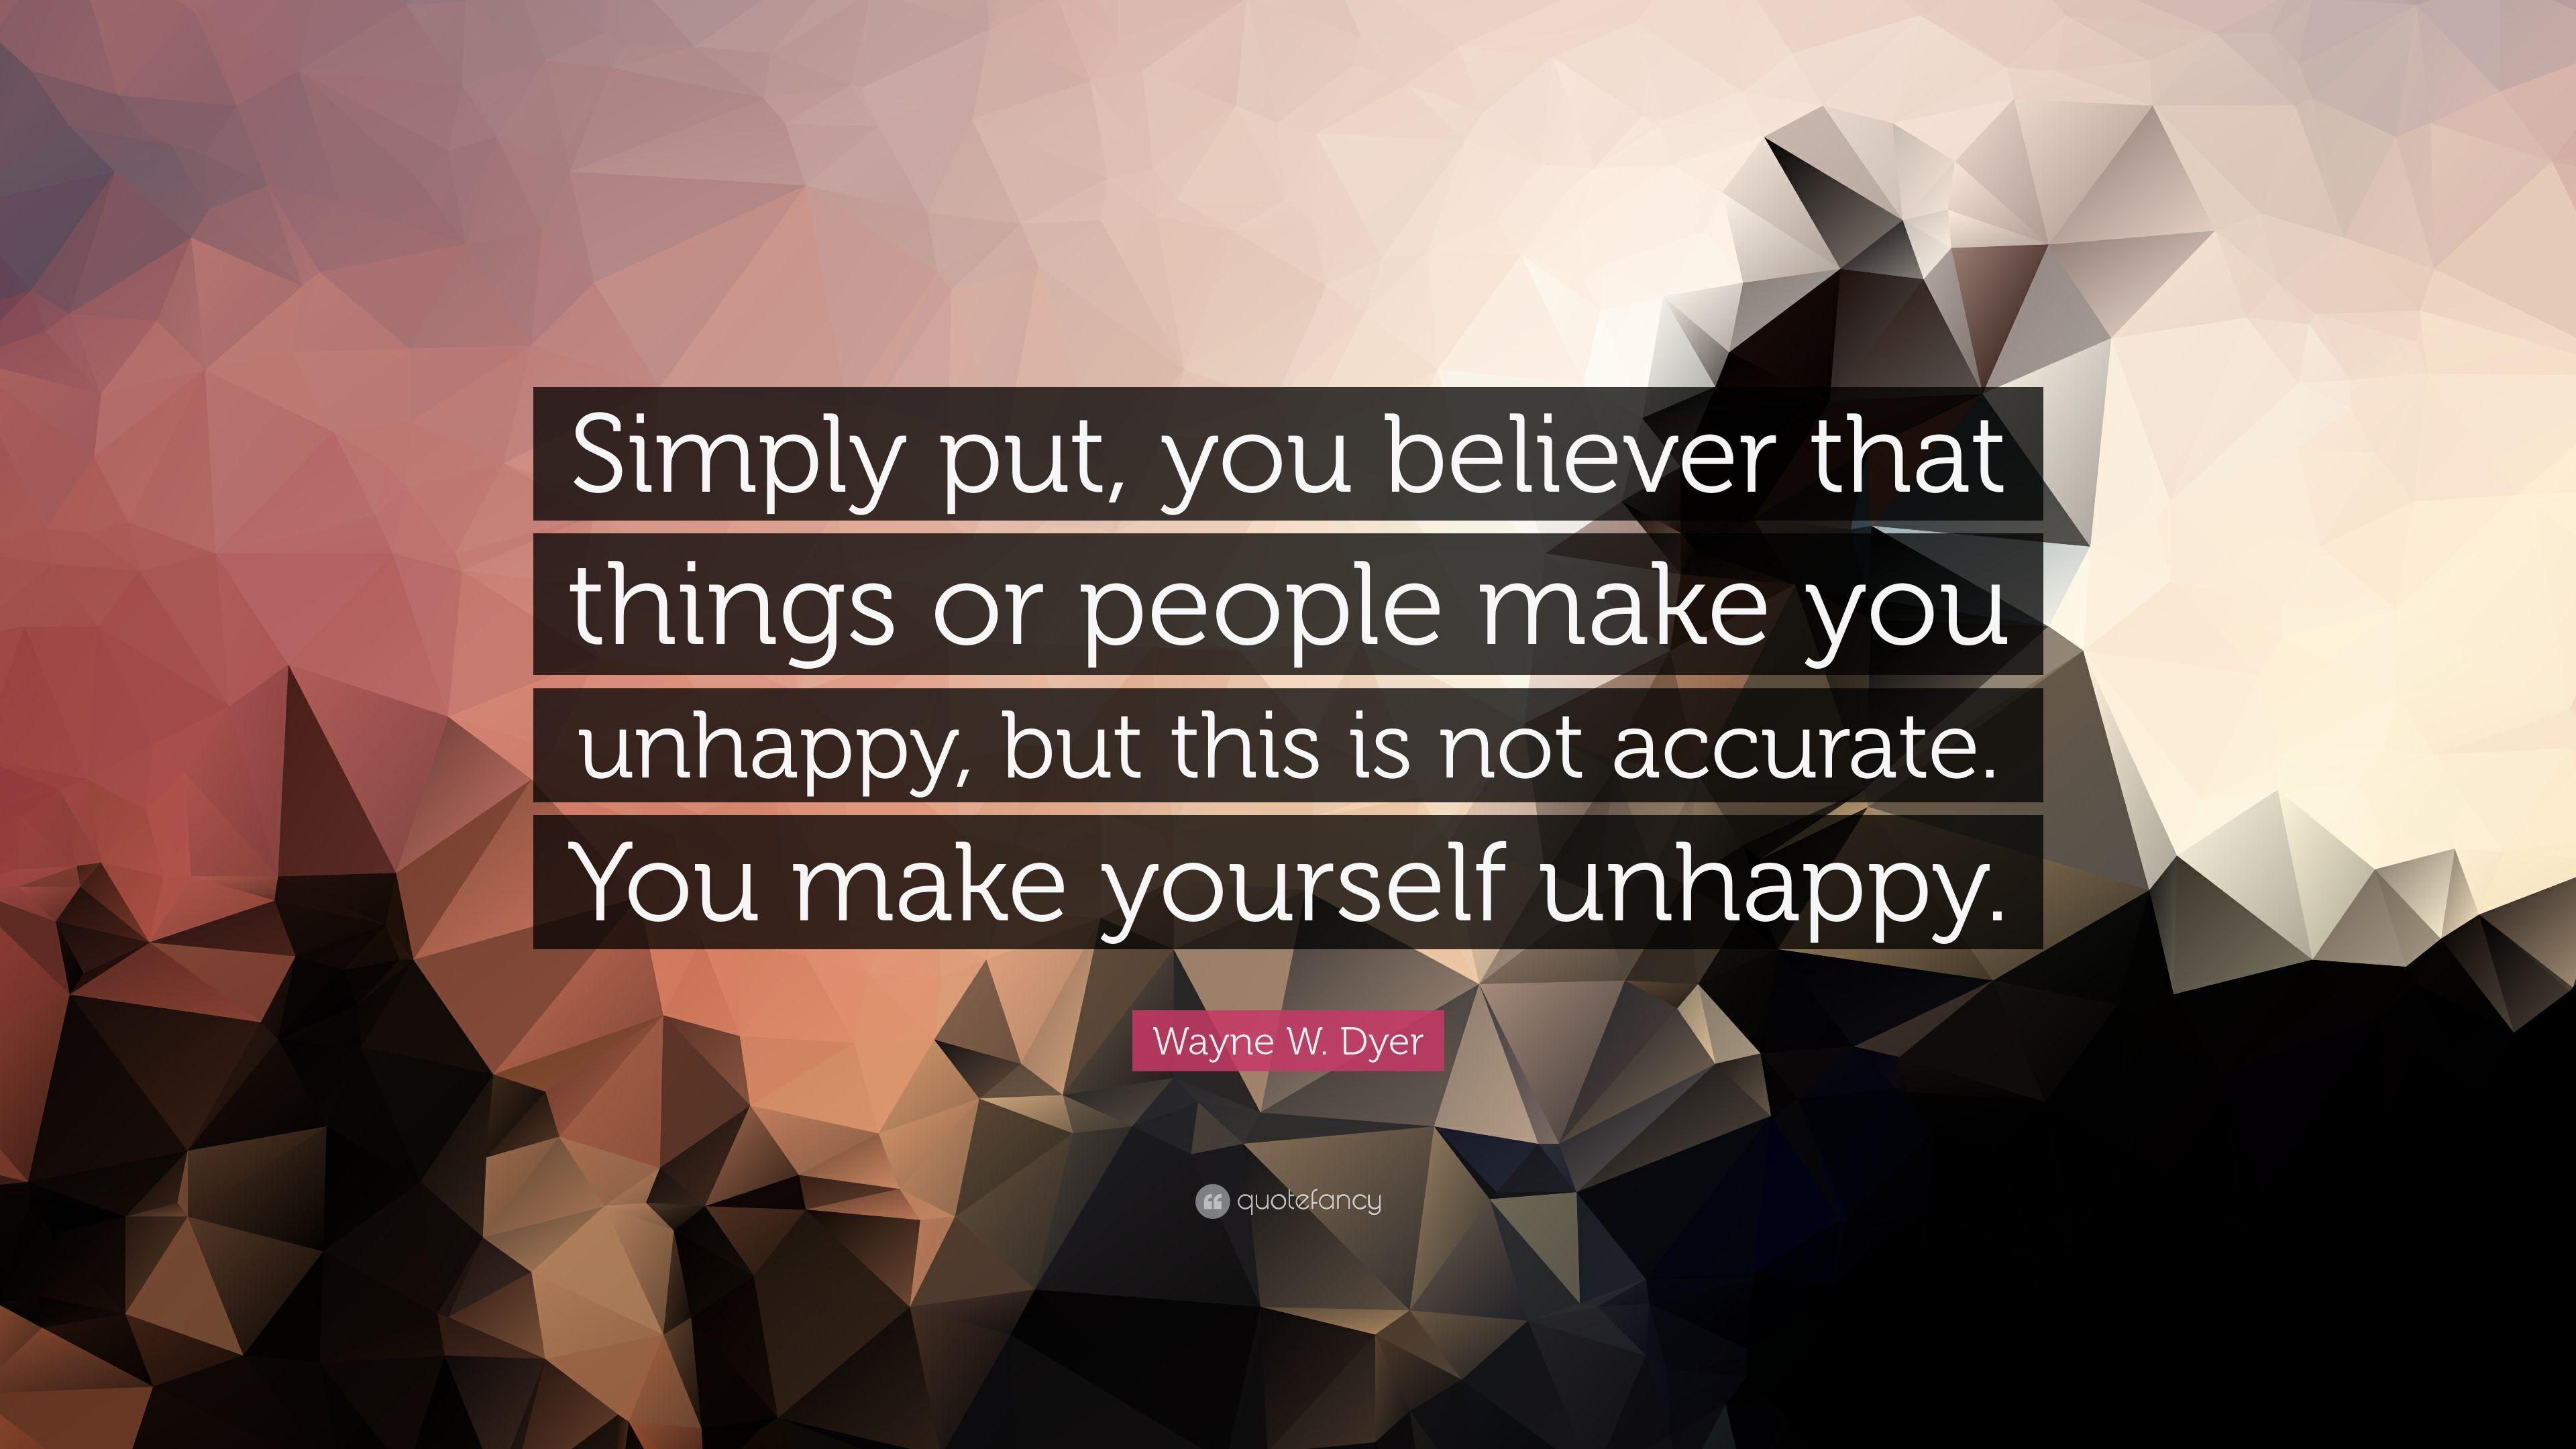 Wayne W. Dyer Quote: “Simply put, you believer that things or people